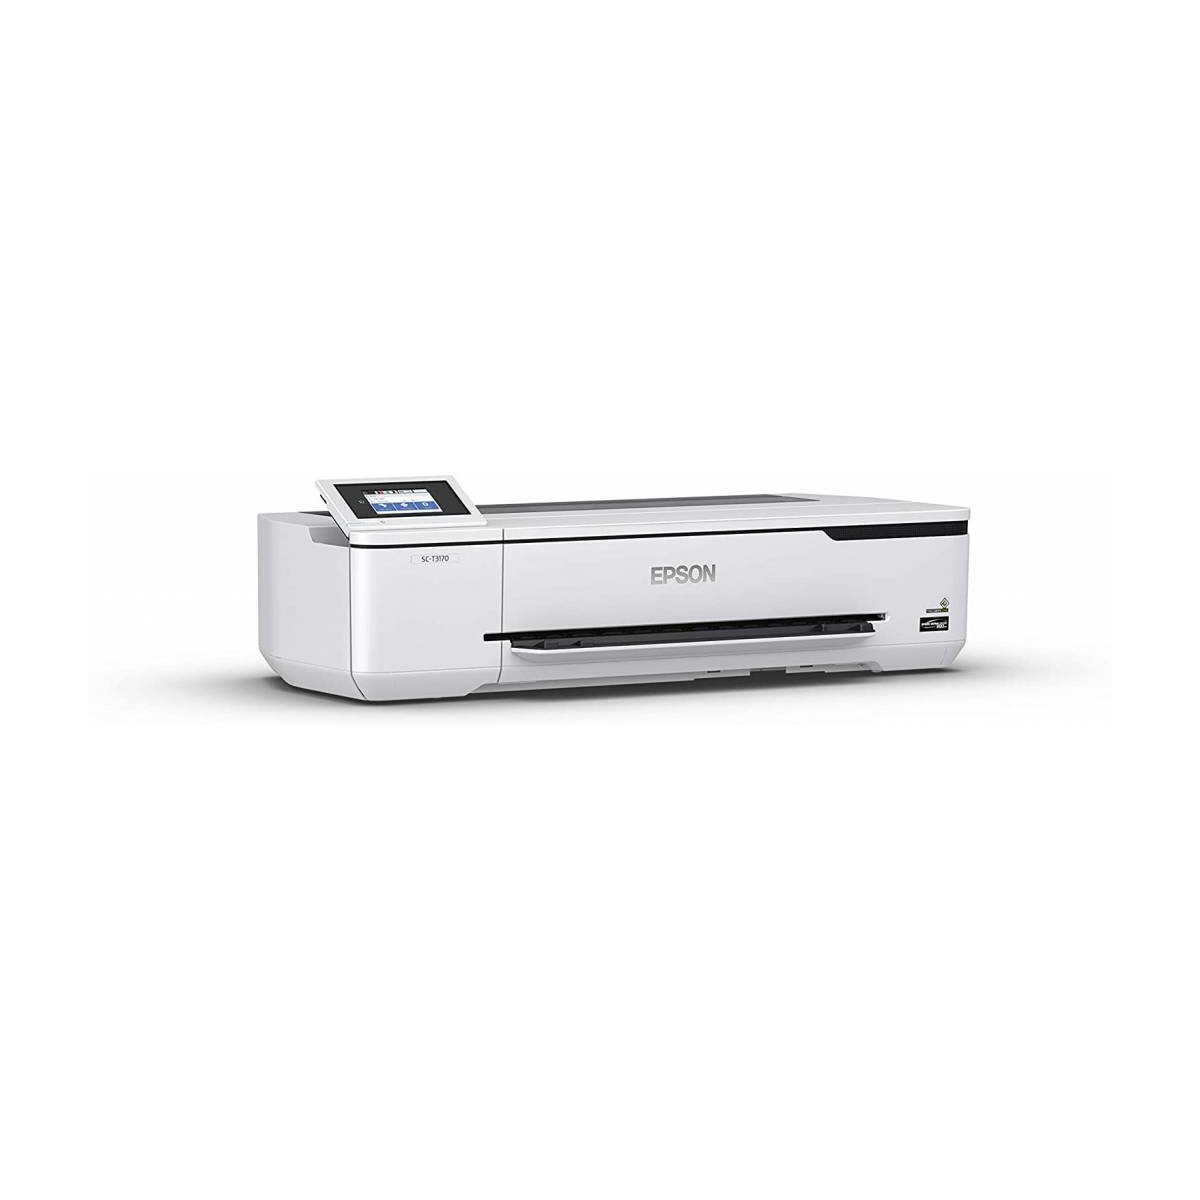 PLOTER EPSON SURECOLOR T3170 INALAMBRICA USB3 0  ETHERNET WILAN WIFI T40V T40WUC CT3170SR